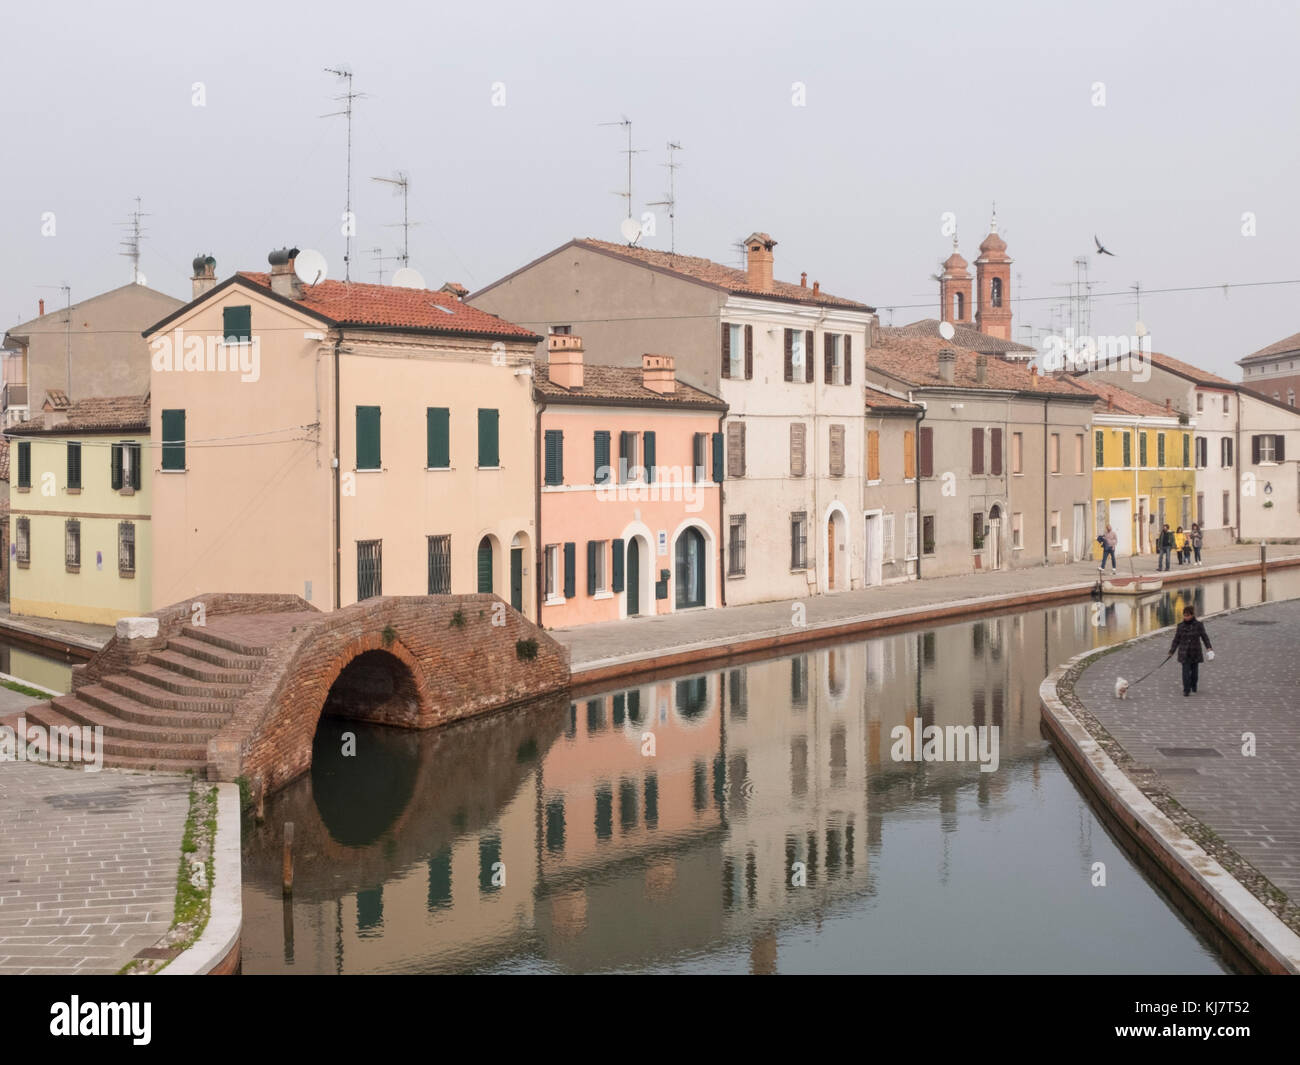 Comacchio, FE, Italy - November 4, 2017: view of one of the canals crossing Comacchio. The colored facades of the houses are reflected on the water. O Stock Photo